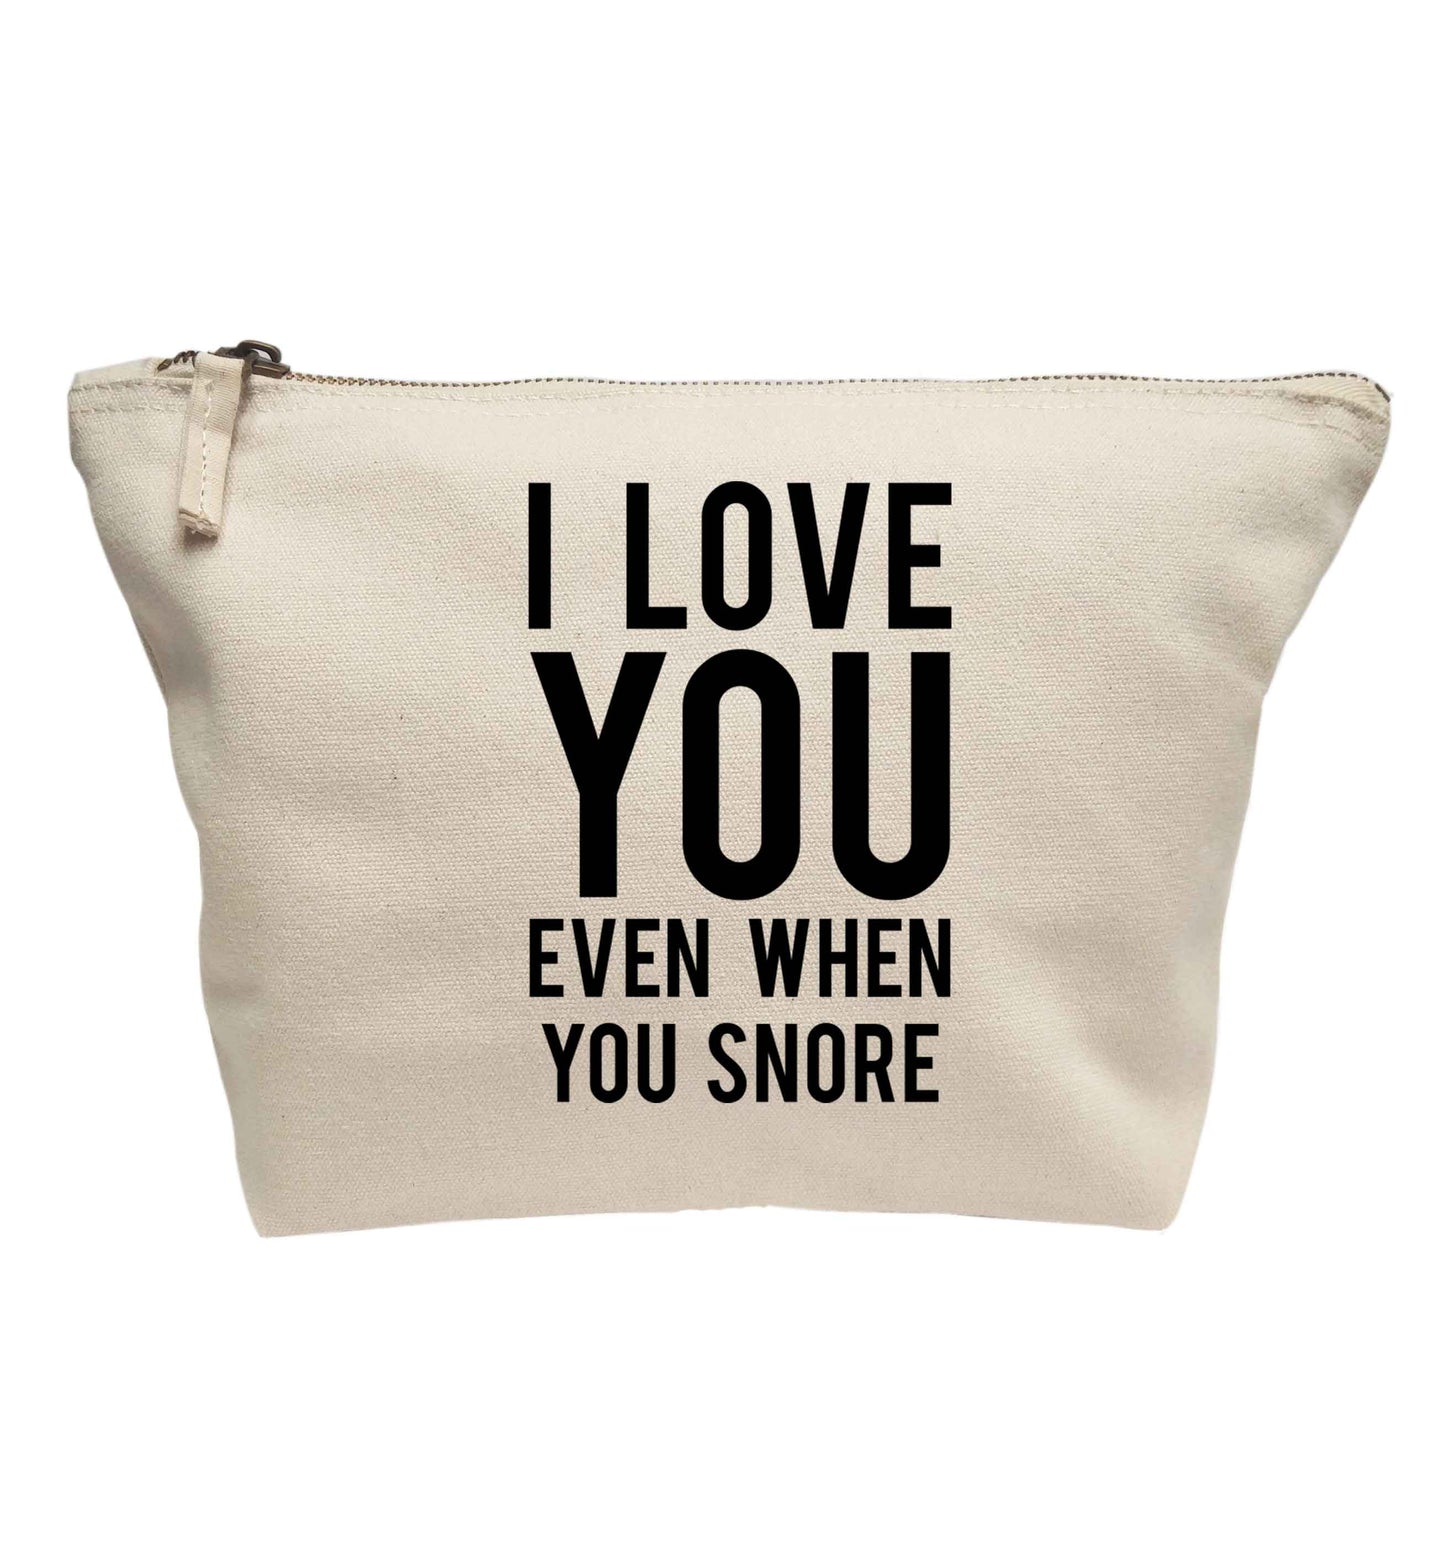 I love you even when you snore | Makeup / wash bag